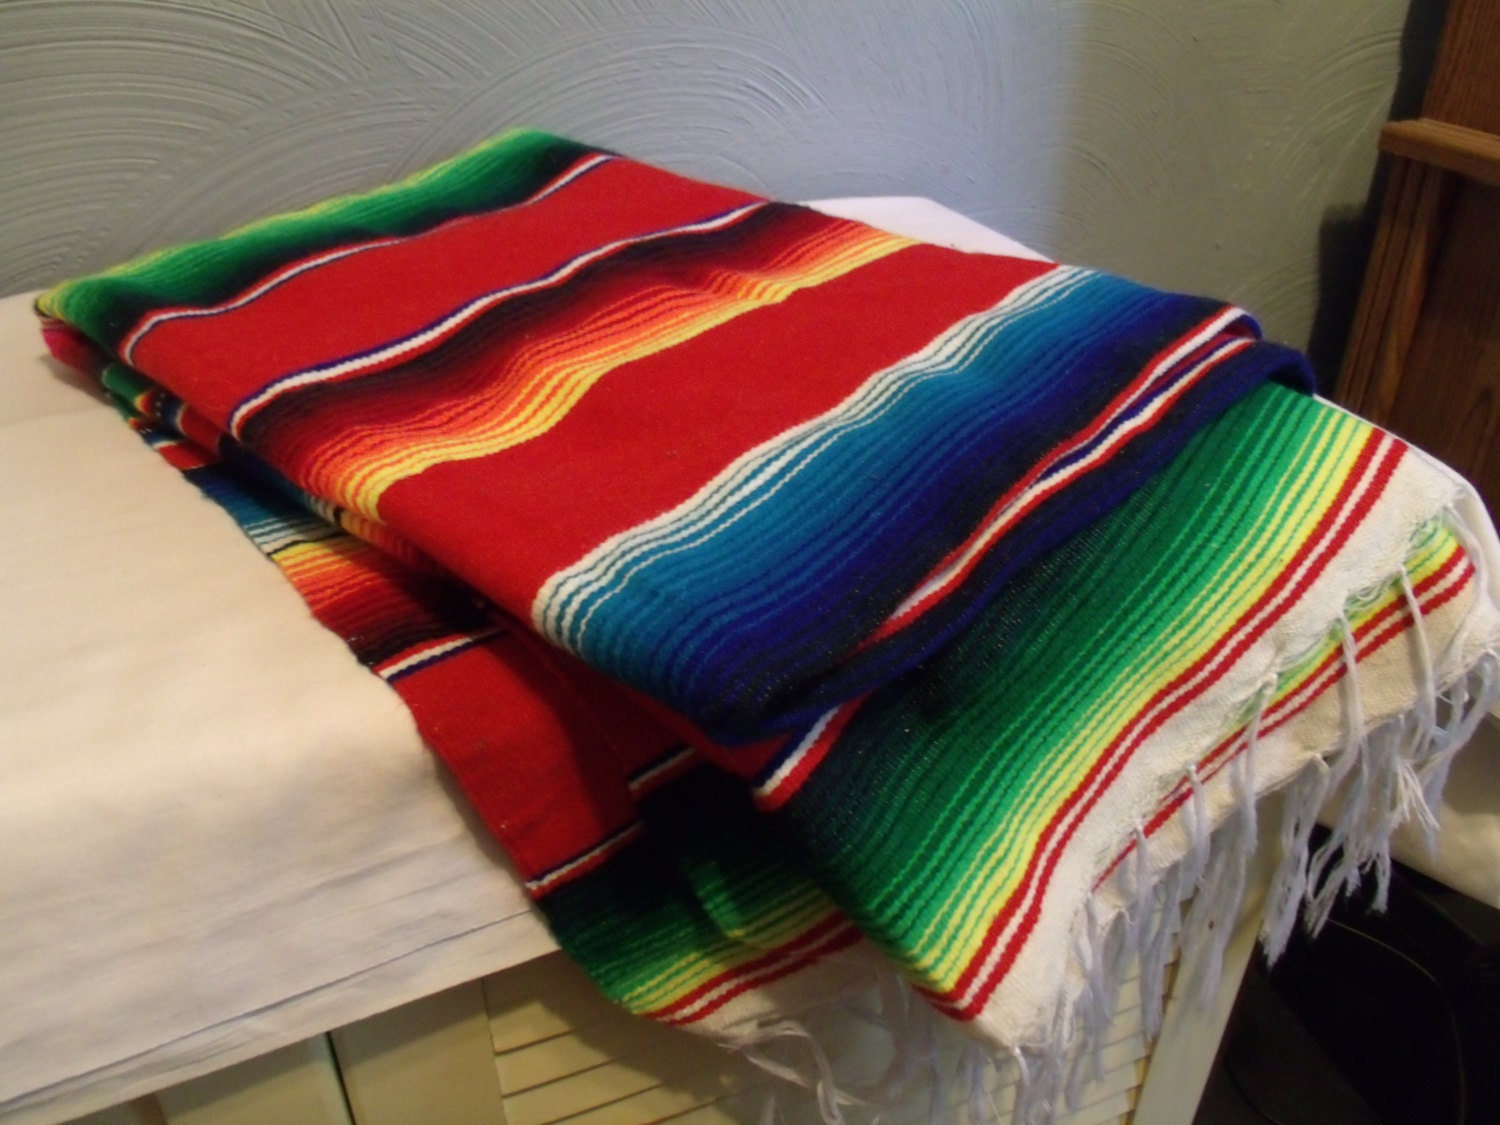 The Proper CareThe Proper Careand Feeding of Mexican Blankets I will share with you how to properlyThe Proper CareThe Proper Careand Feeding of Mexican Blankets I will share with you how to properlywashand dry an authenticThe Proper CareThe Proper Careand Feeding of Mexican Blankets I will share with you how to properlyThe Proper CareThe Proper Careand Feeding of Mexican Blankets I will share with you how to properlywashand dry an authenticMexican blanket:The Proper CareThe Proper Careand Feeding of Mexican Blankets I will share with you how to properlyThe Proper CareThe Proper Careand Feeding of Mexican Blankets I will share with you how to properlywashand dry an authenticThe Proper CareThe Proper Careand Feeding of Mexican Blankets I will share with you how to properlyThe Proper CareThe Proper Careand Feeding of Mexican Blankets I will share with you how to properlywashand dry an authenticMexican blanket:Clean blanketof all foreign